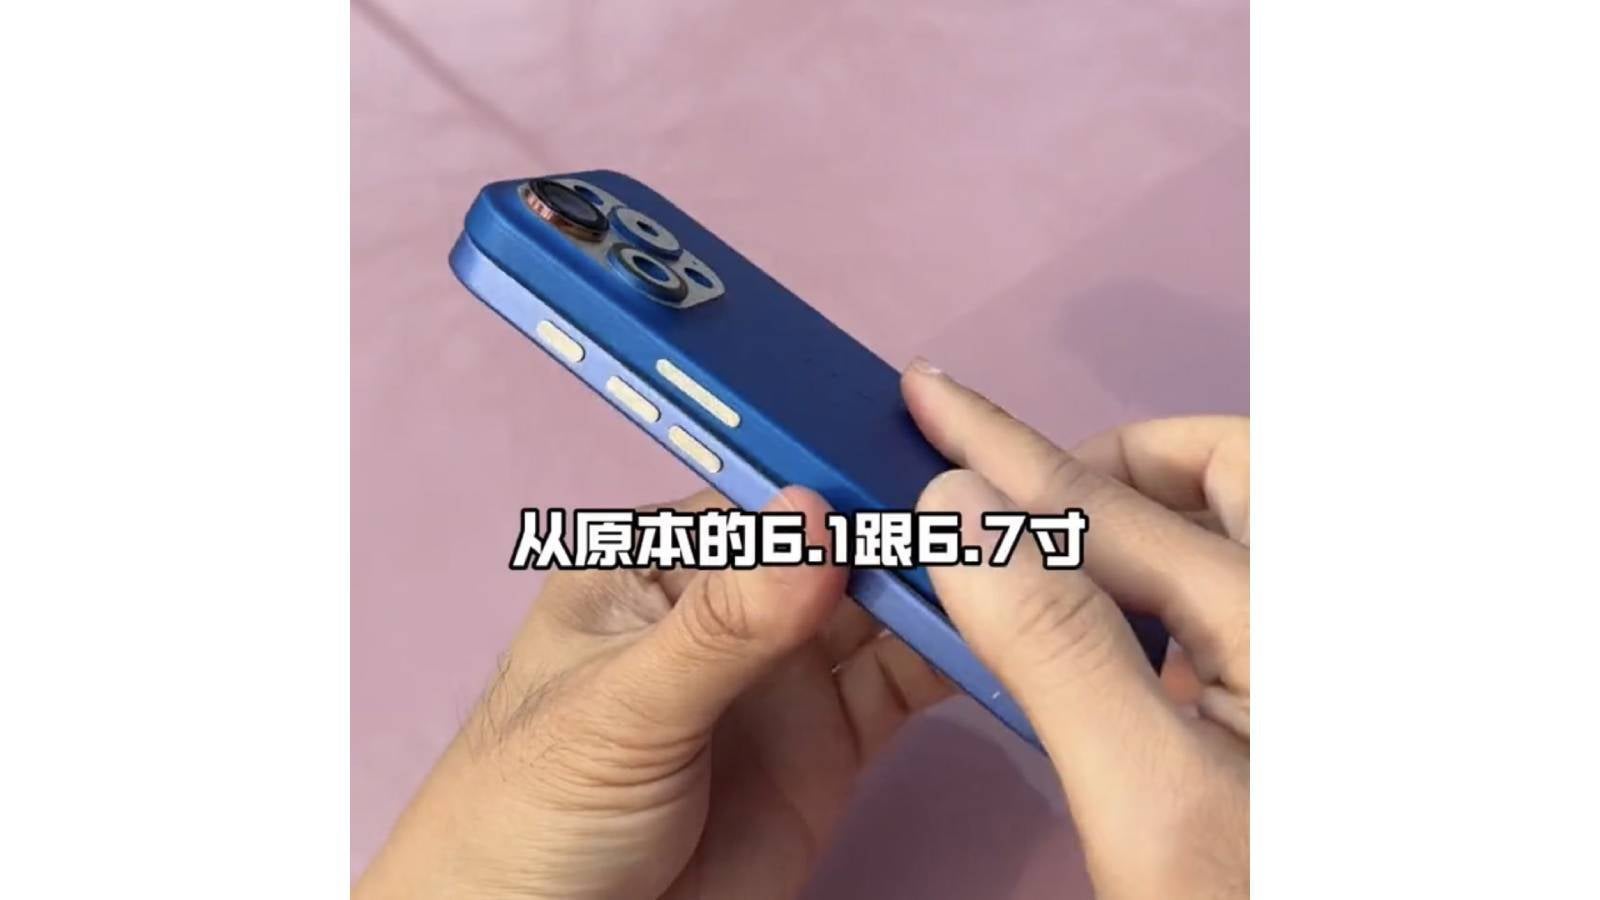 iPhone 16 Pro's customizable action button could be a bit bigger - Few iPhone 16 surprises left as images of dummy units and case leaked